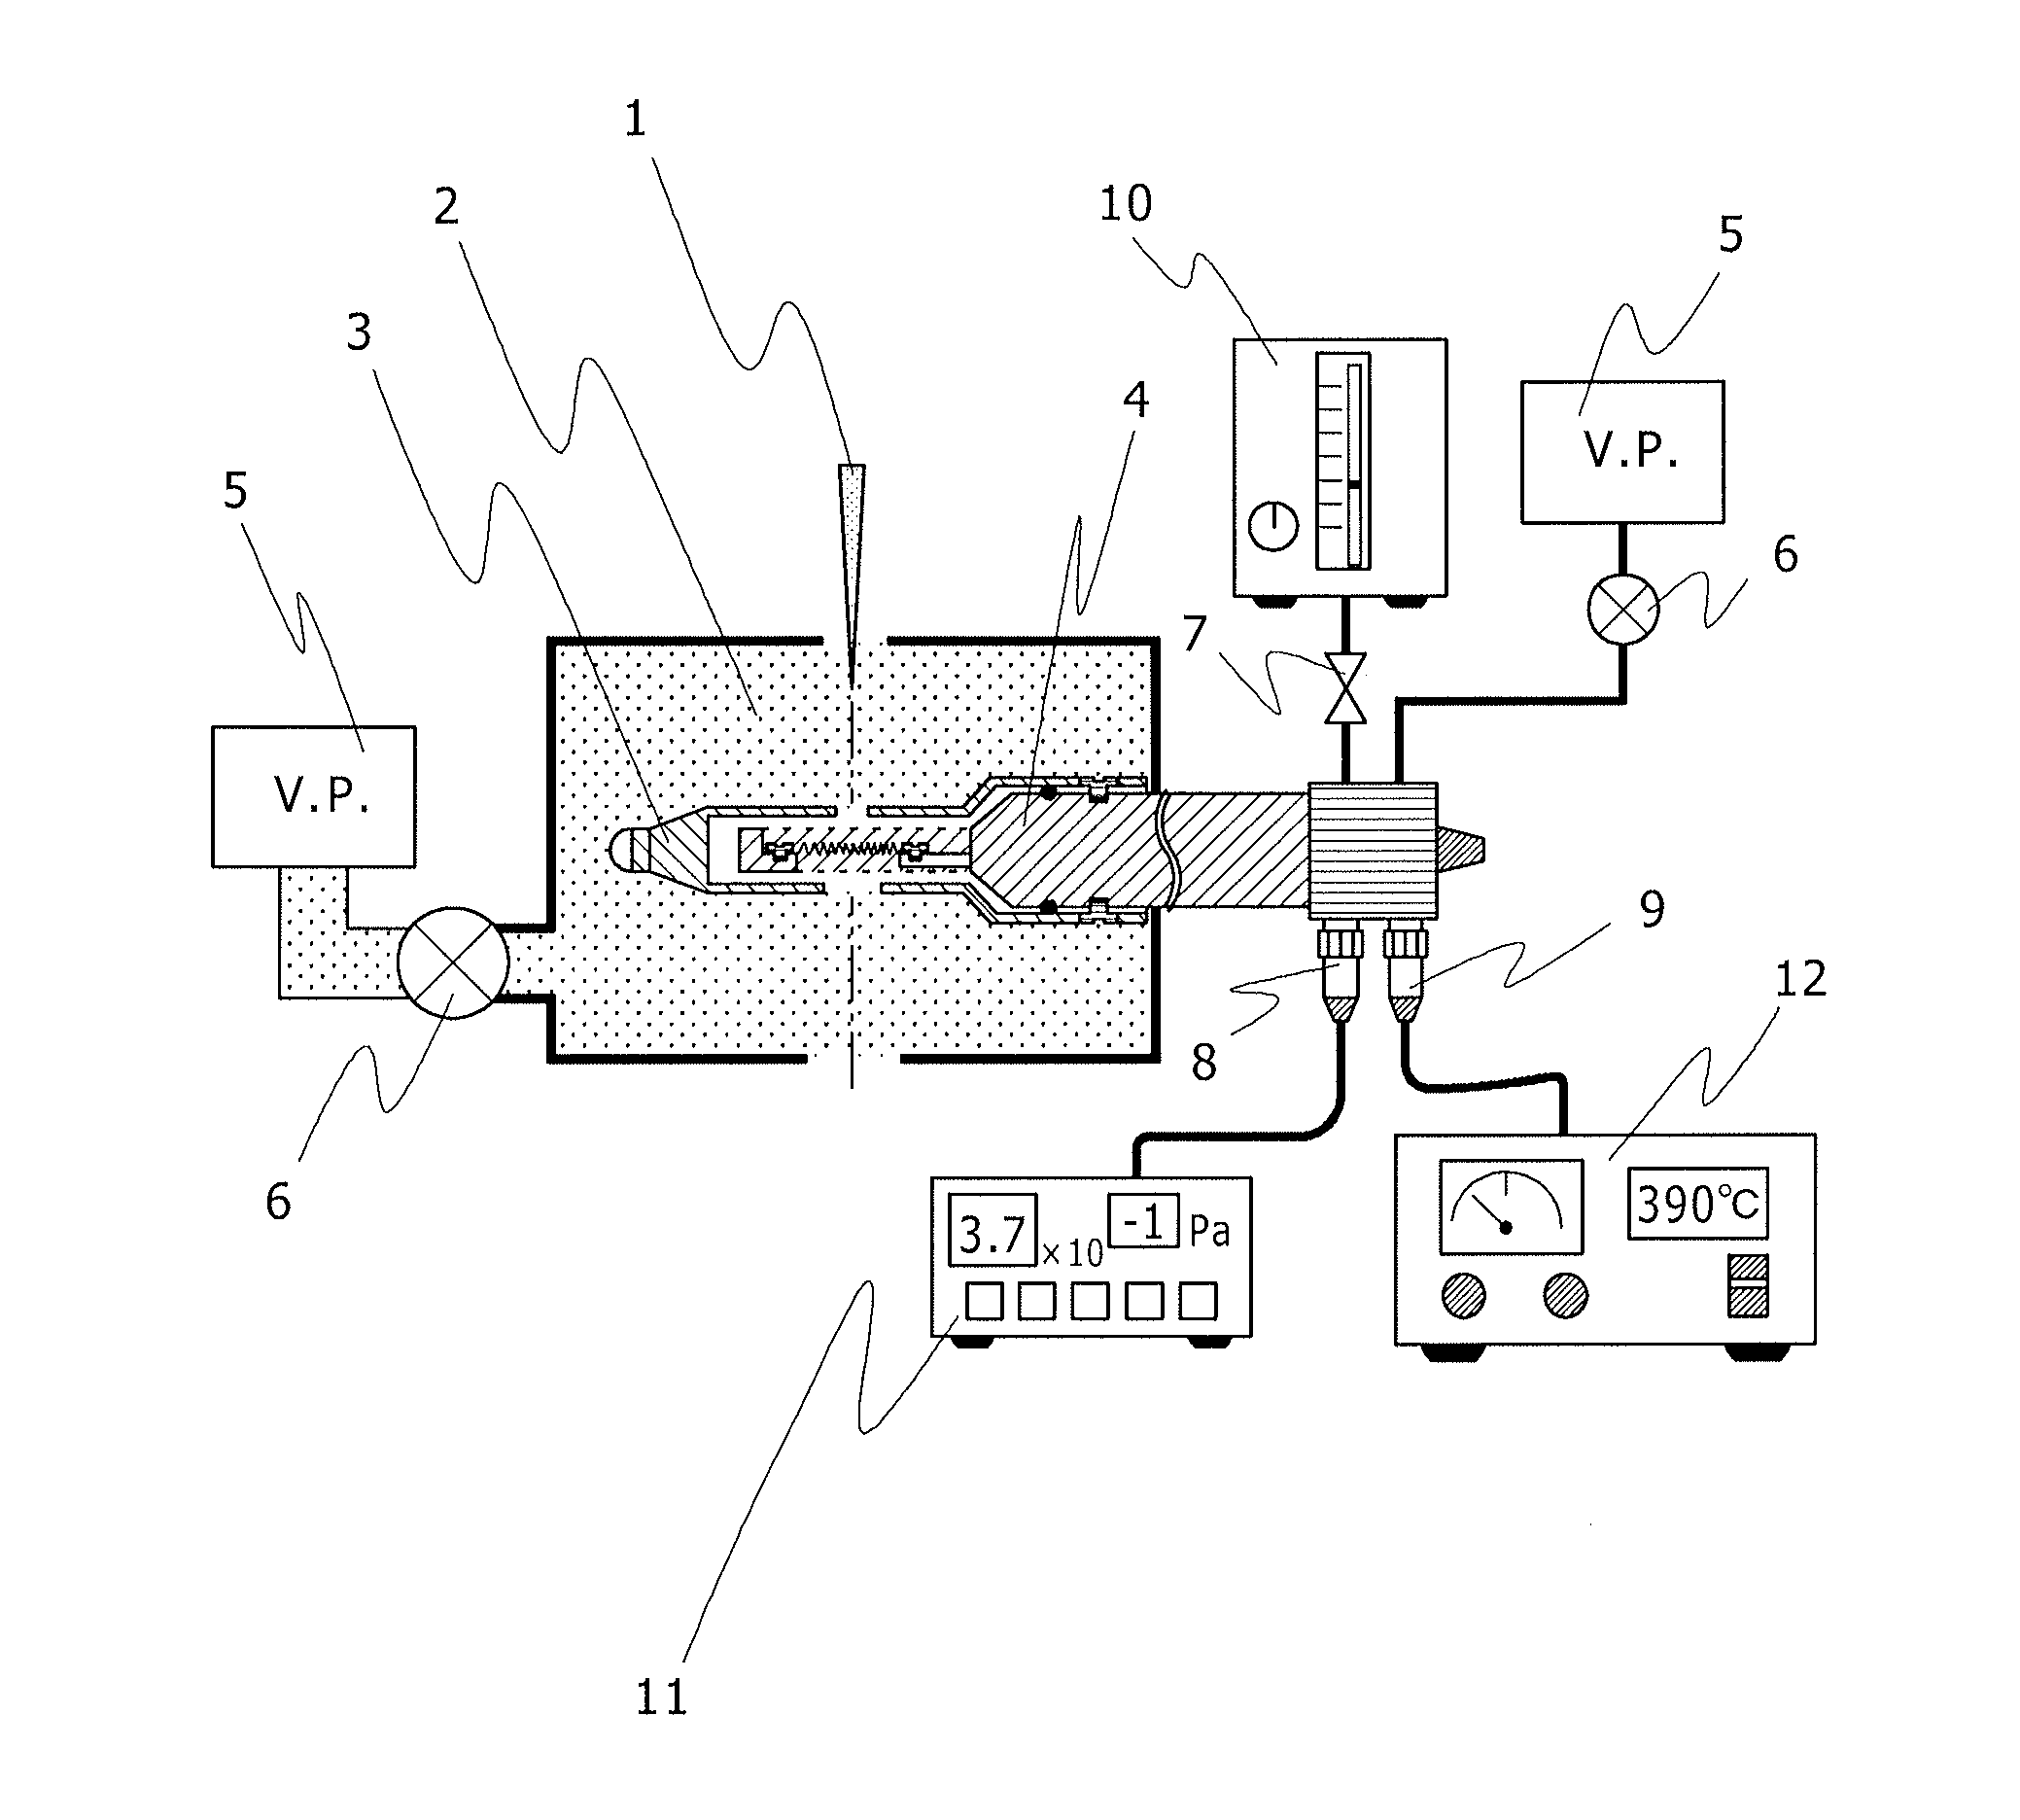 Sample Holder and Charged Particle Device